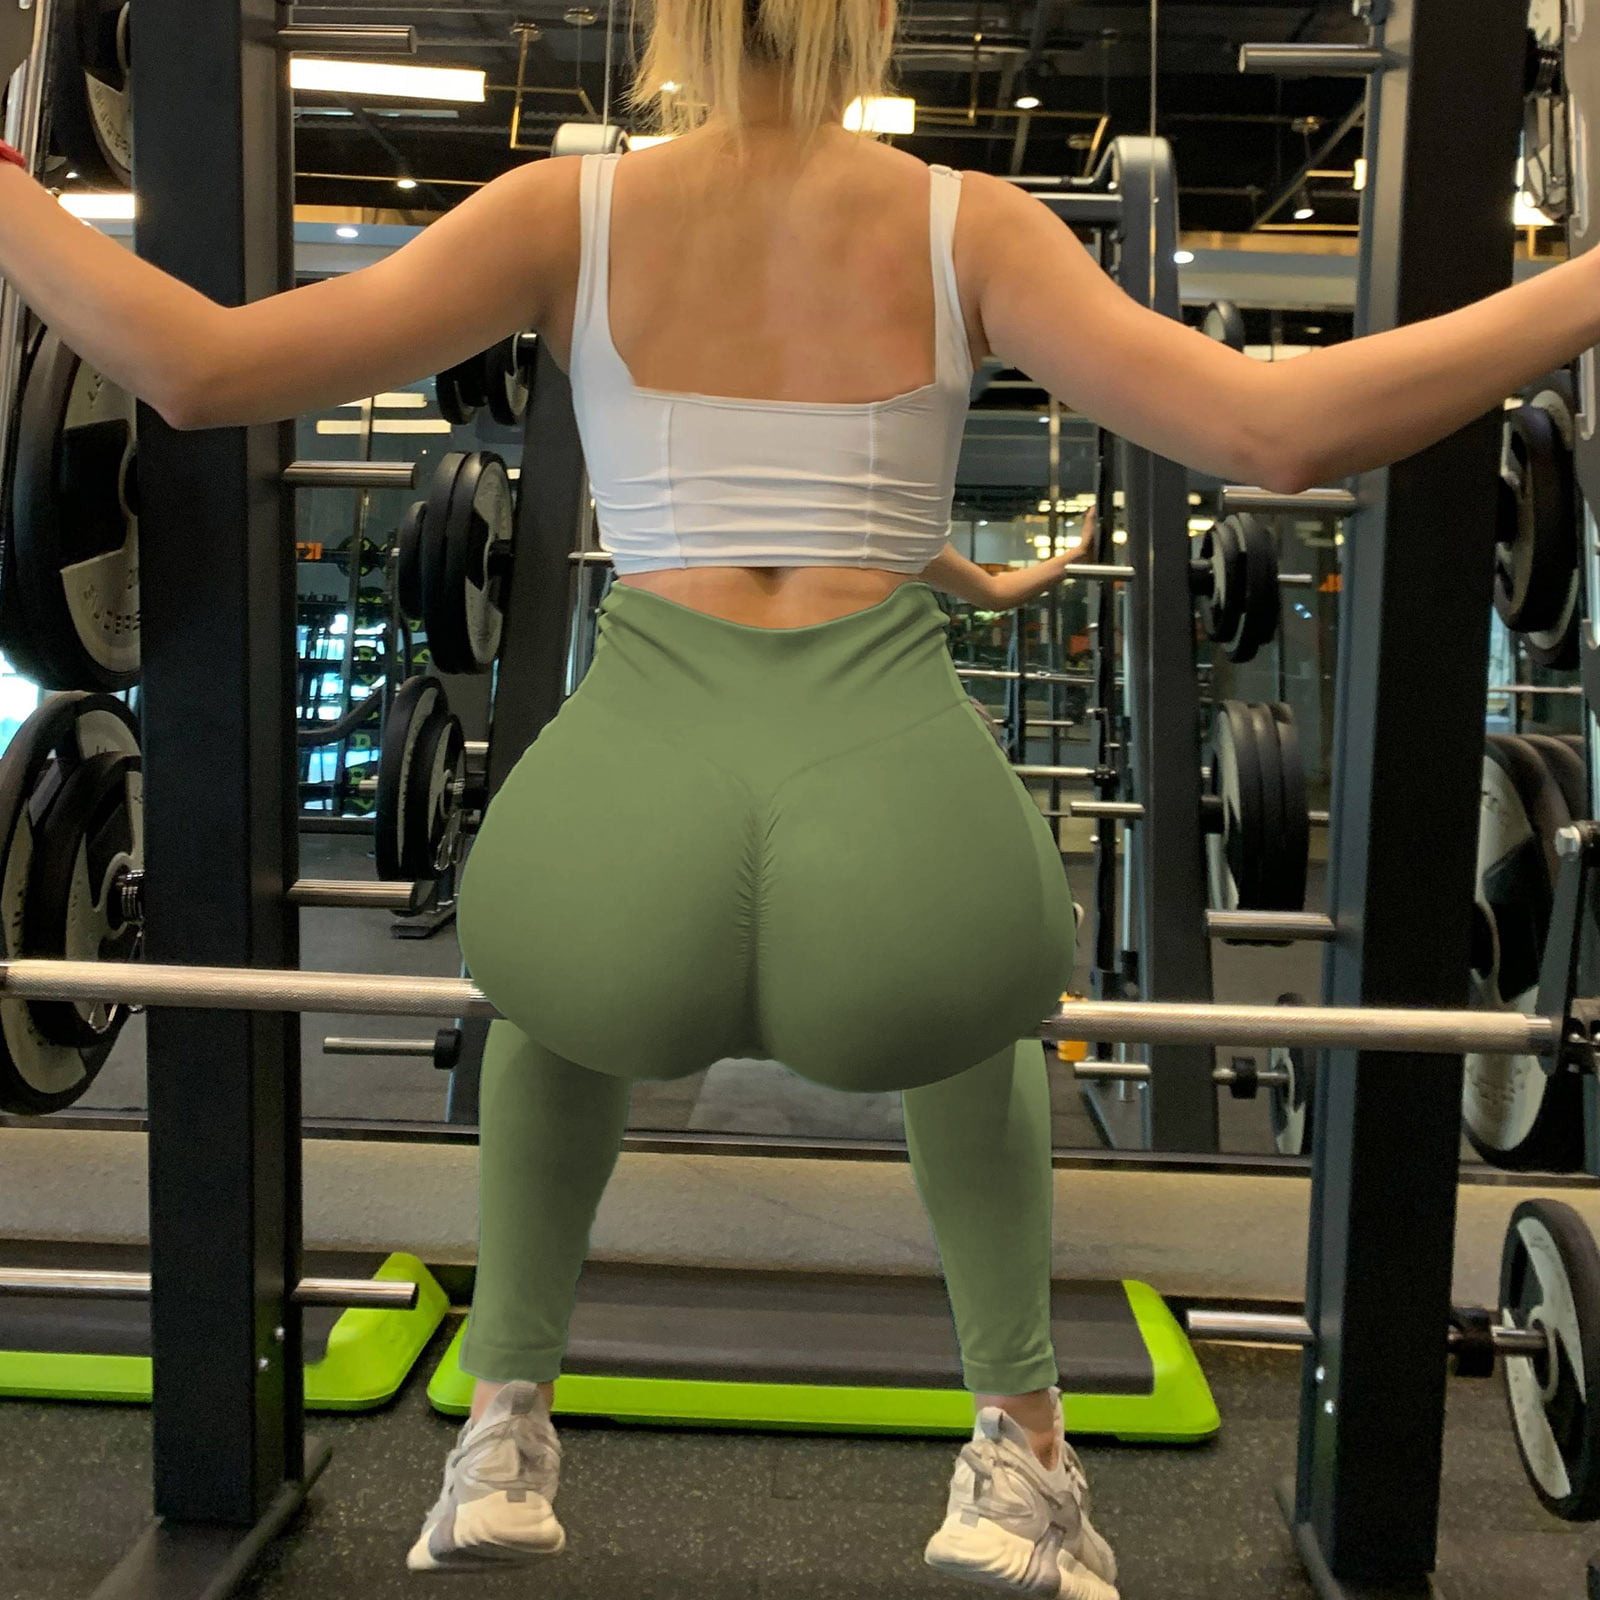 Candid Booty 58